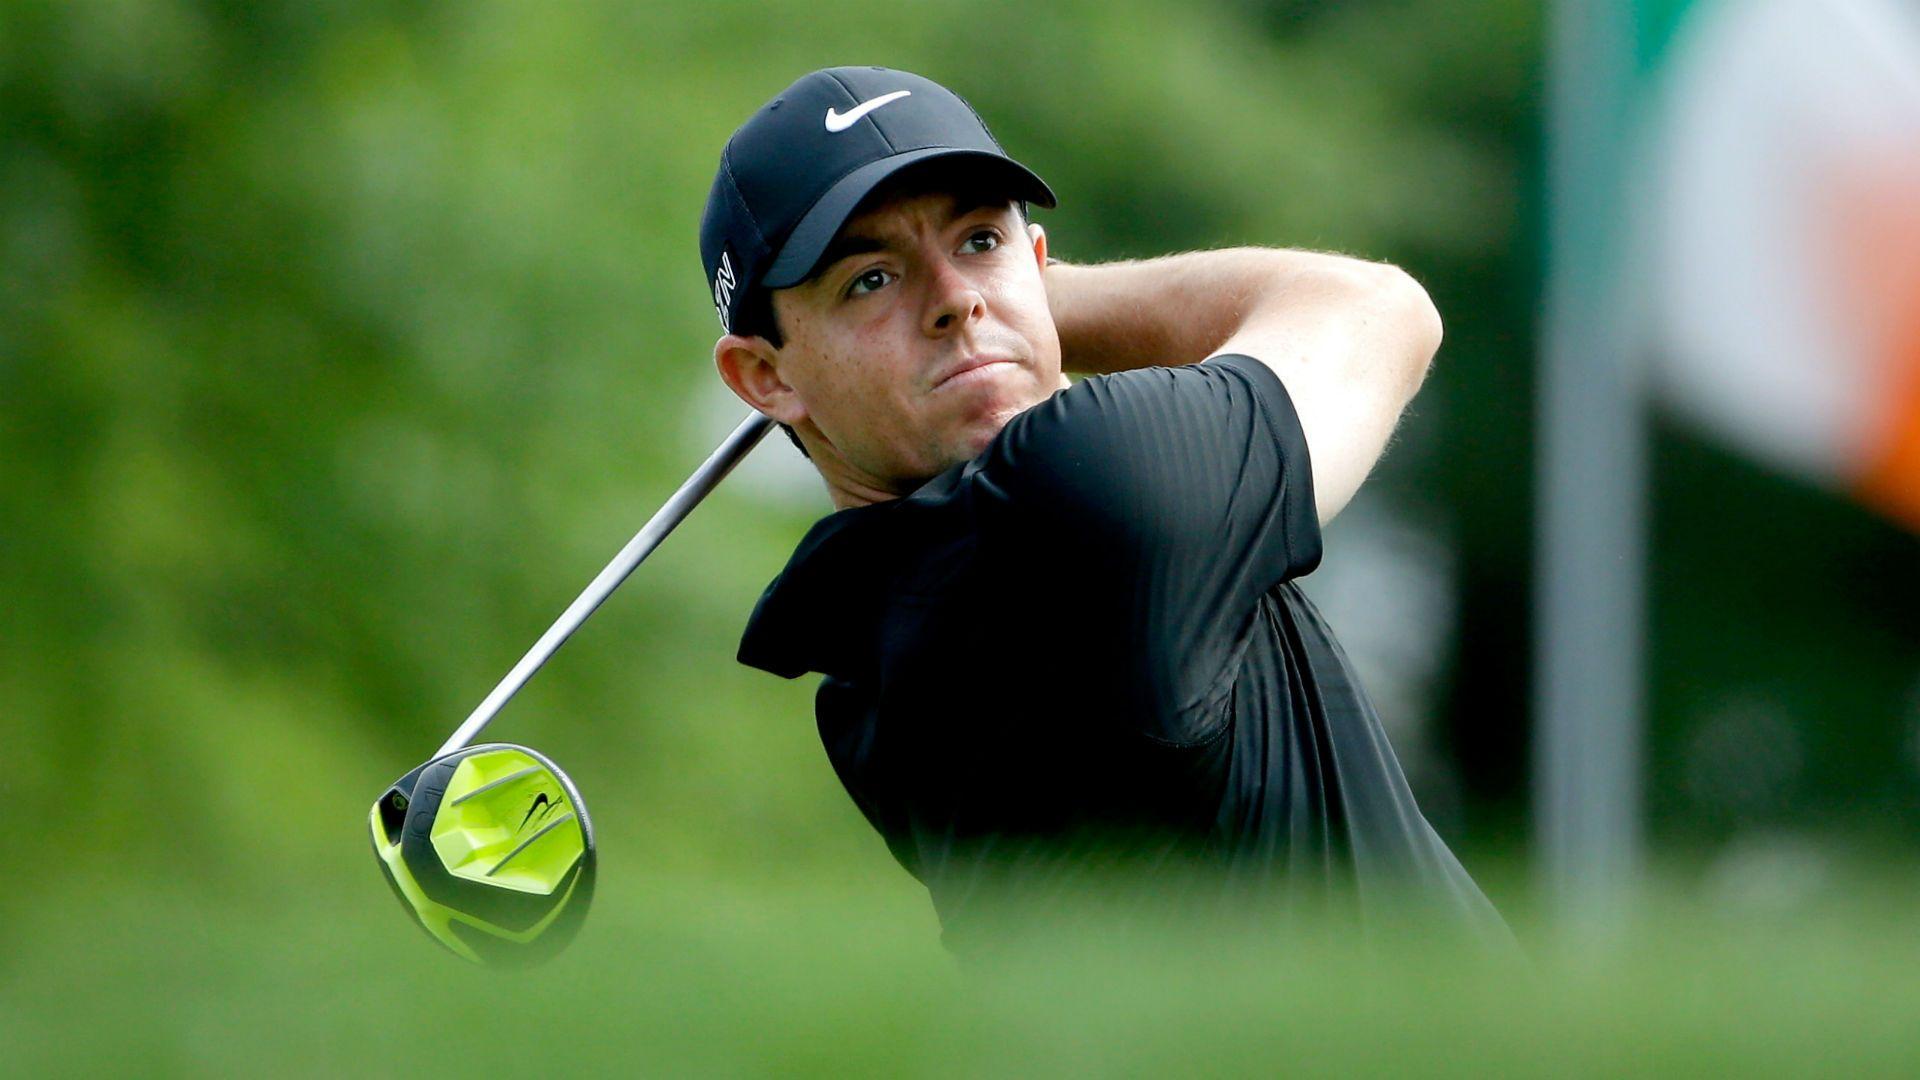 Ridiculously rich Rory McIlroy worth more than $400 million. Golf